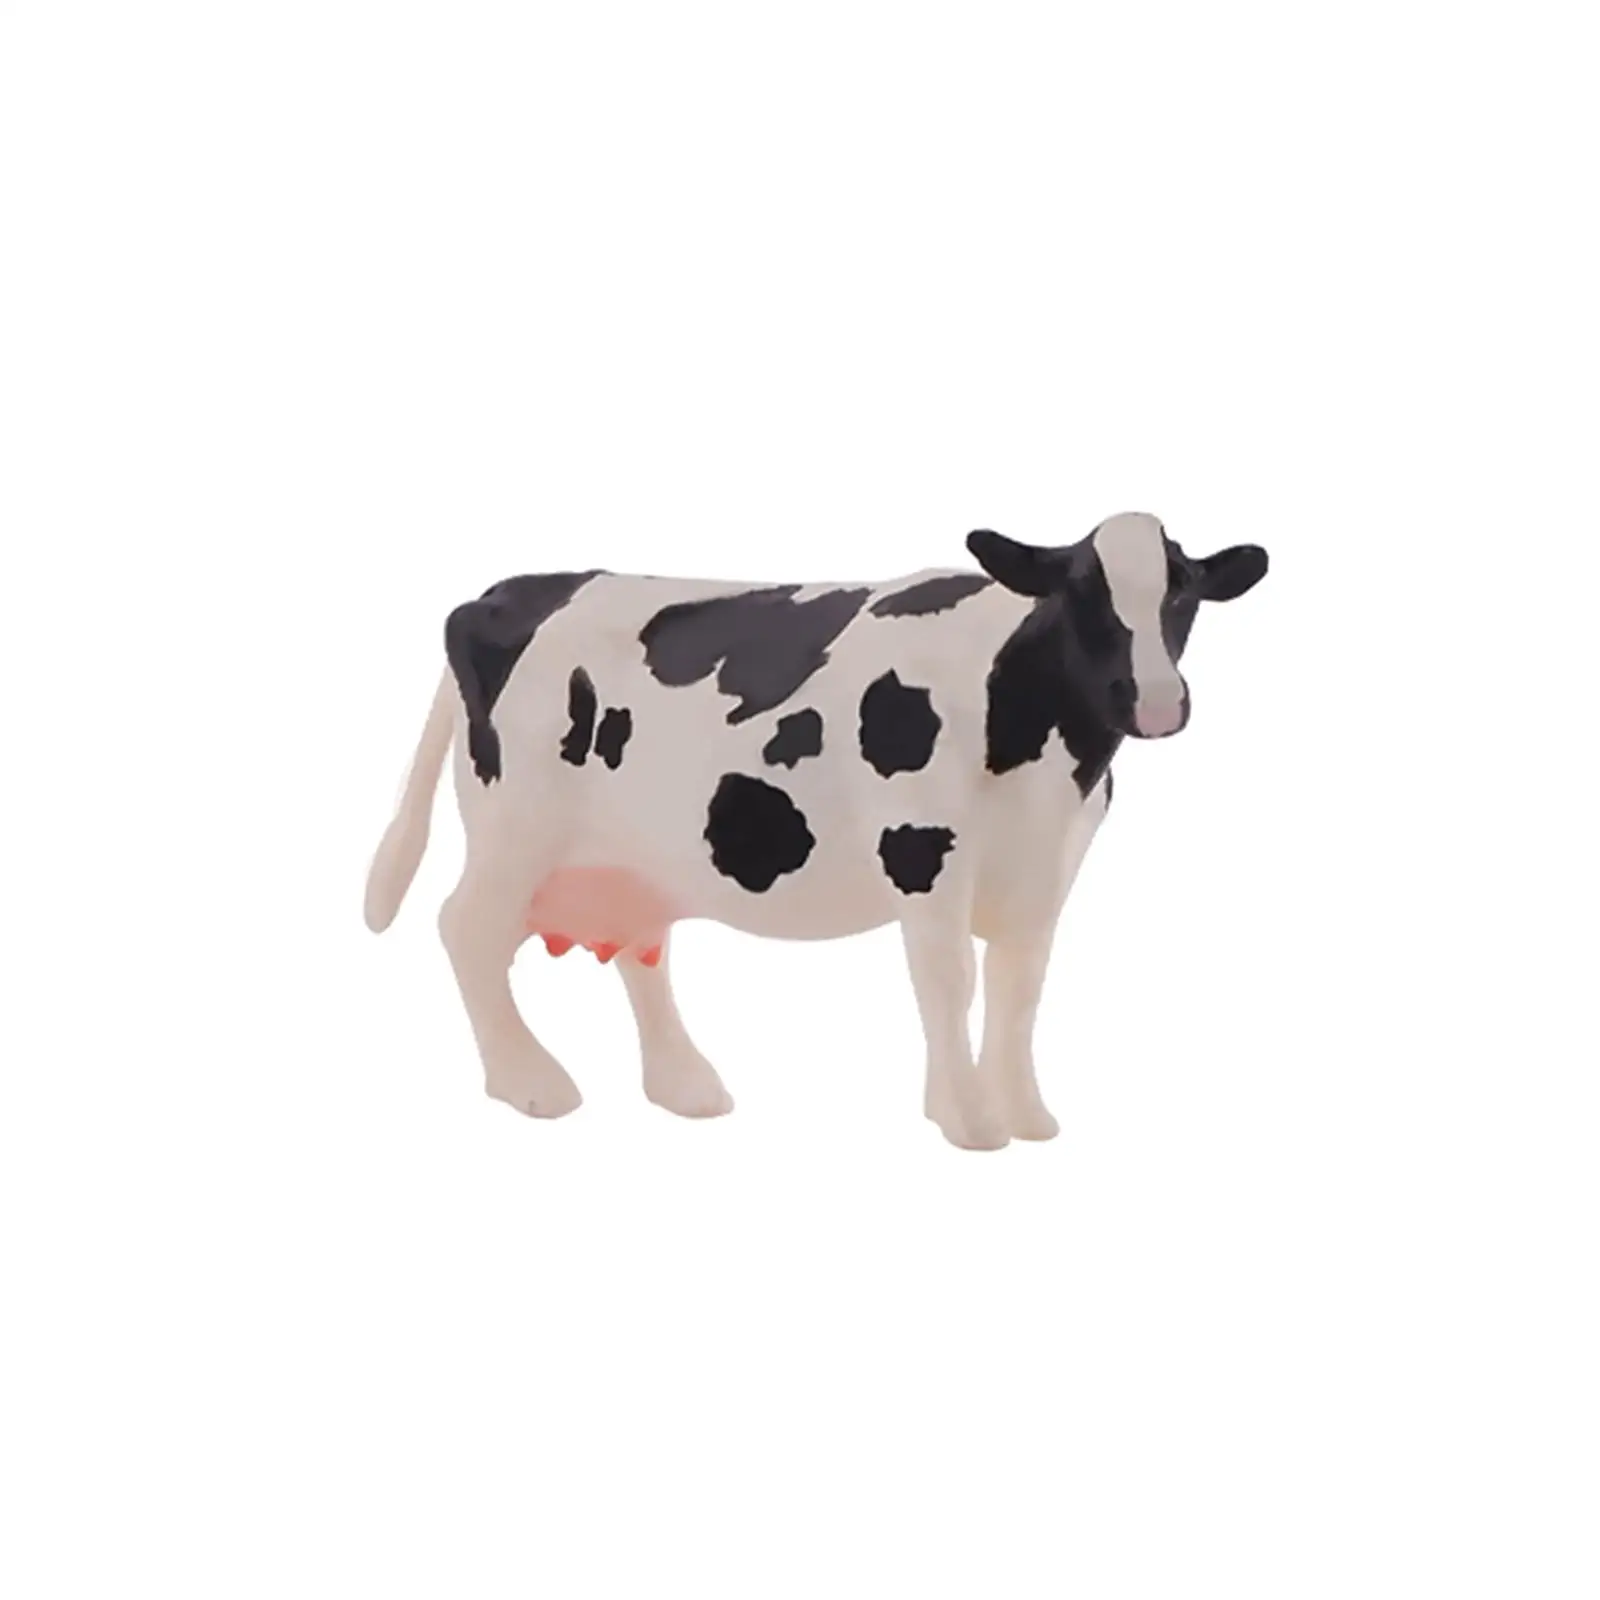 Mini Cow Figurine Dioramas Tiny Role Play Figure Resin 1/64 Scale Miniature Cows Model for Train Station Layout Fairy Garden